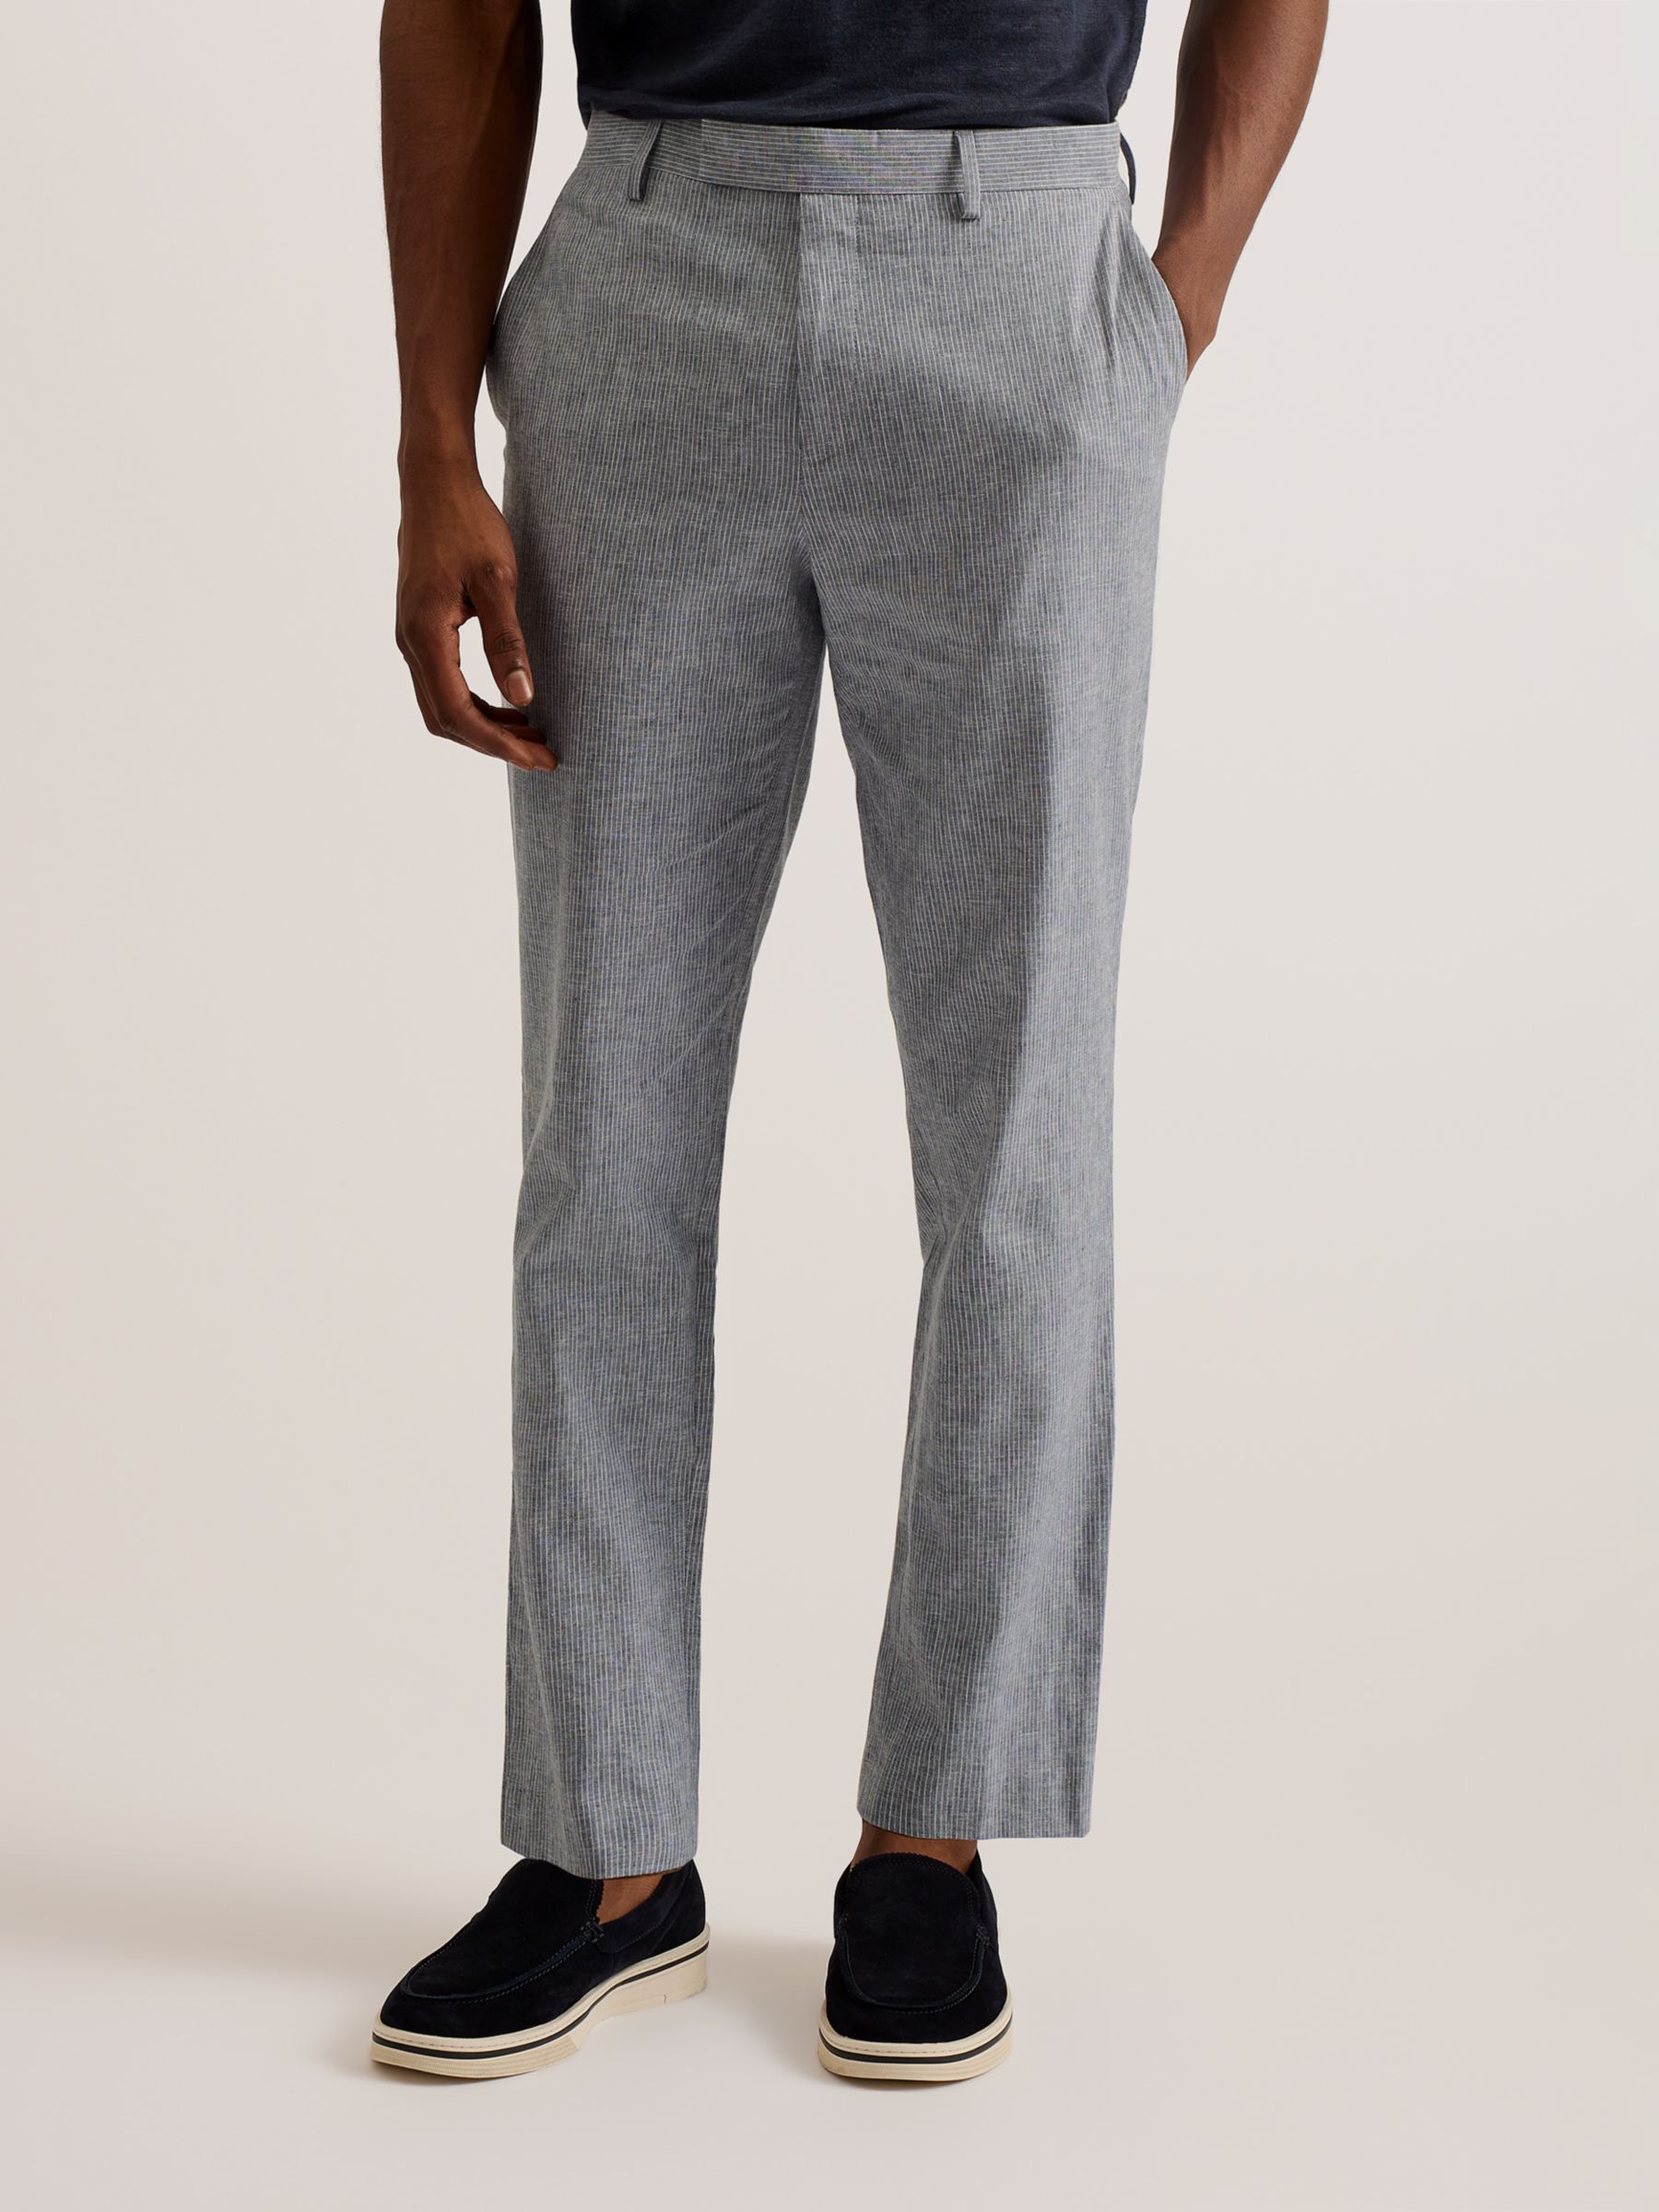 Buy Ted Baker Pinstripe Slim Tailored Trousers, Light Grey Online at johnlewis.com